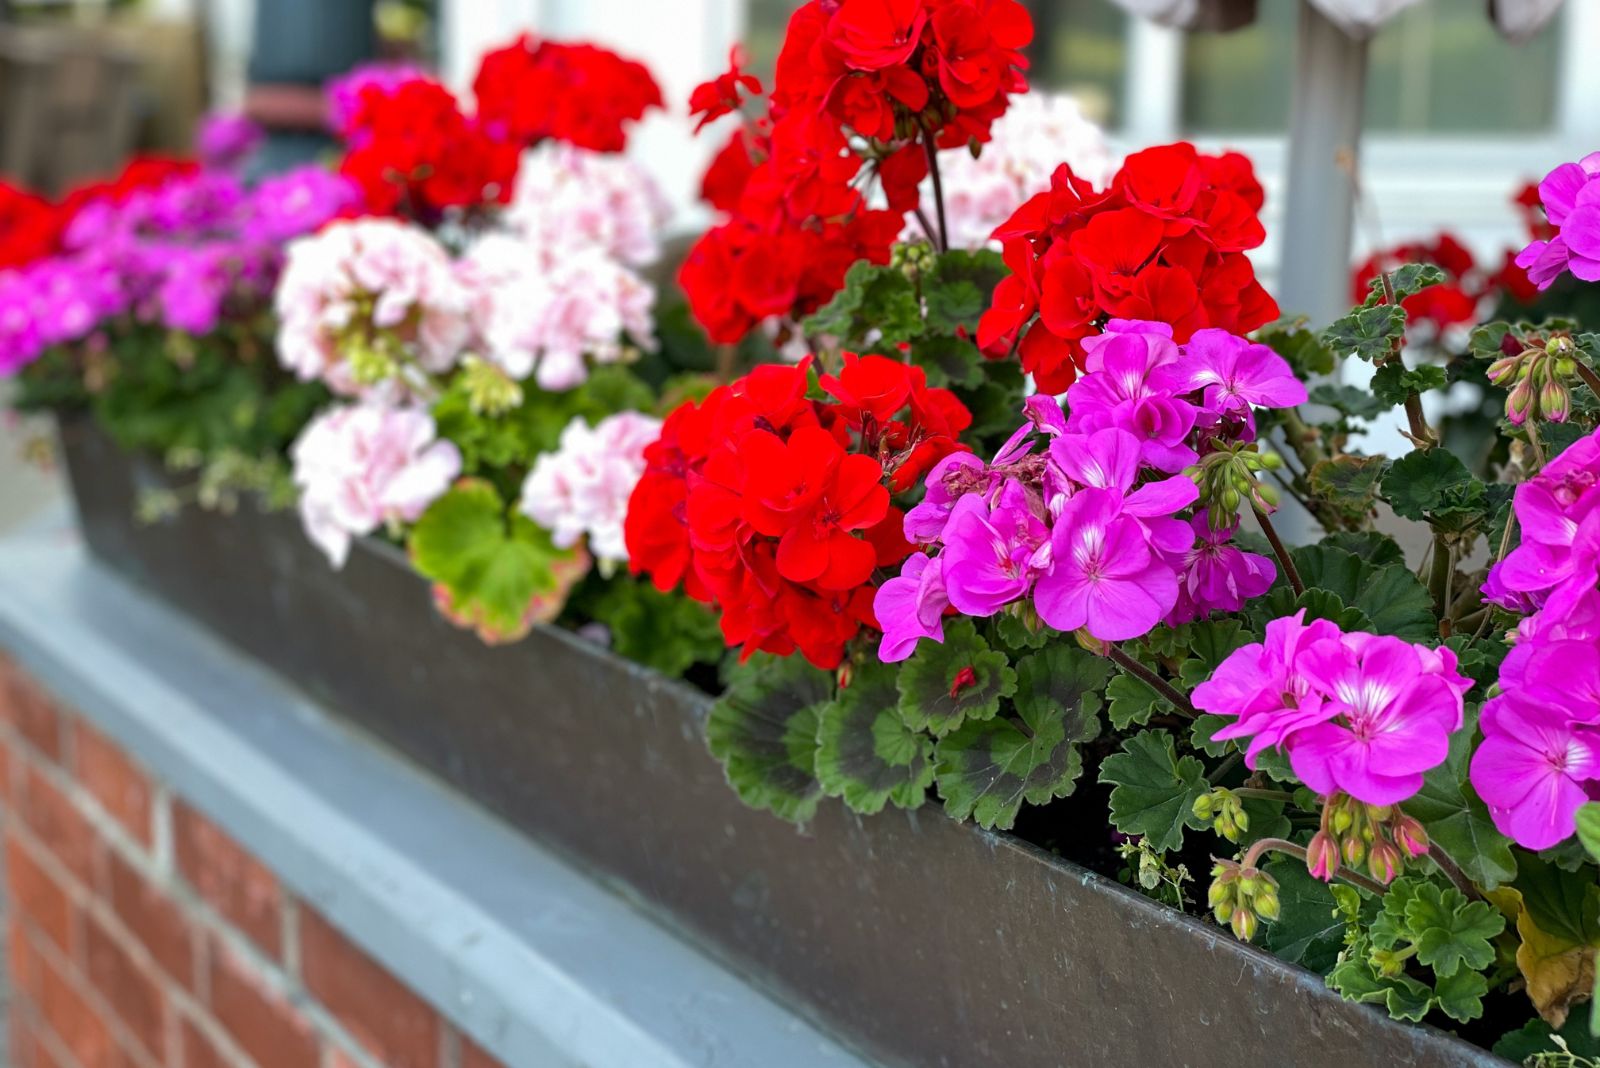 red and pink blooming geranium flowers in flowers pot on window